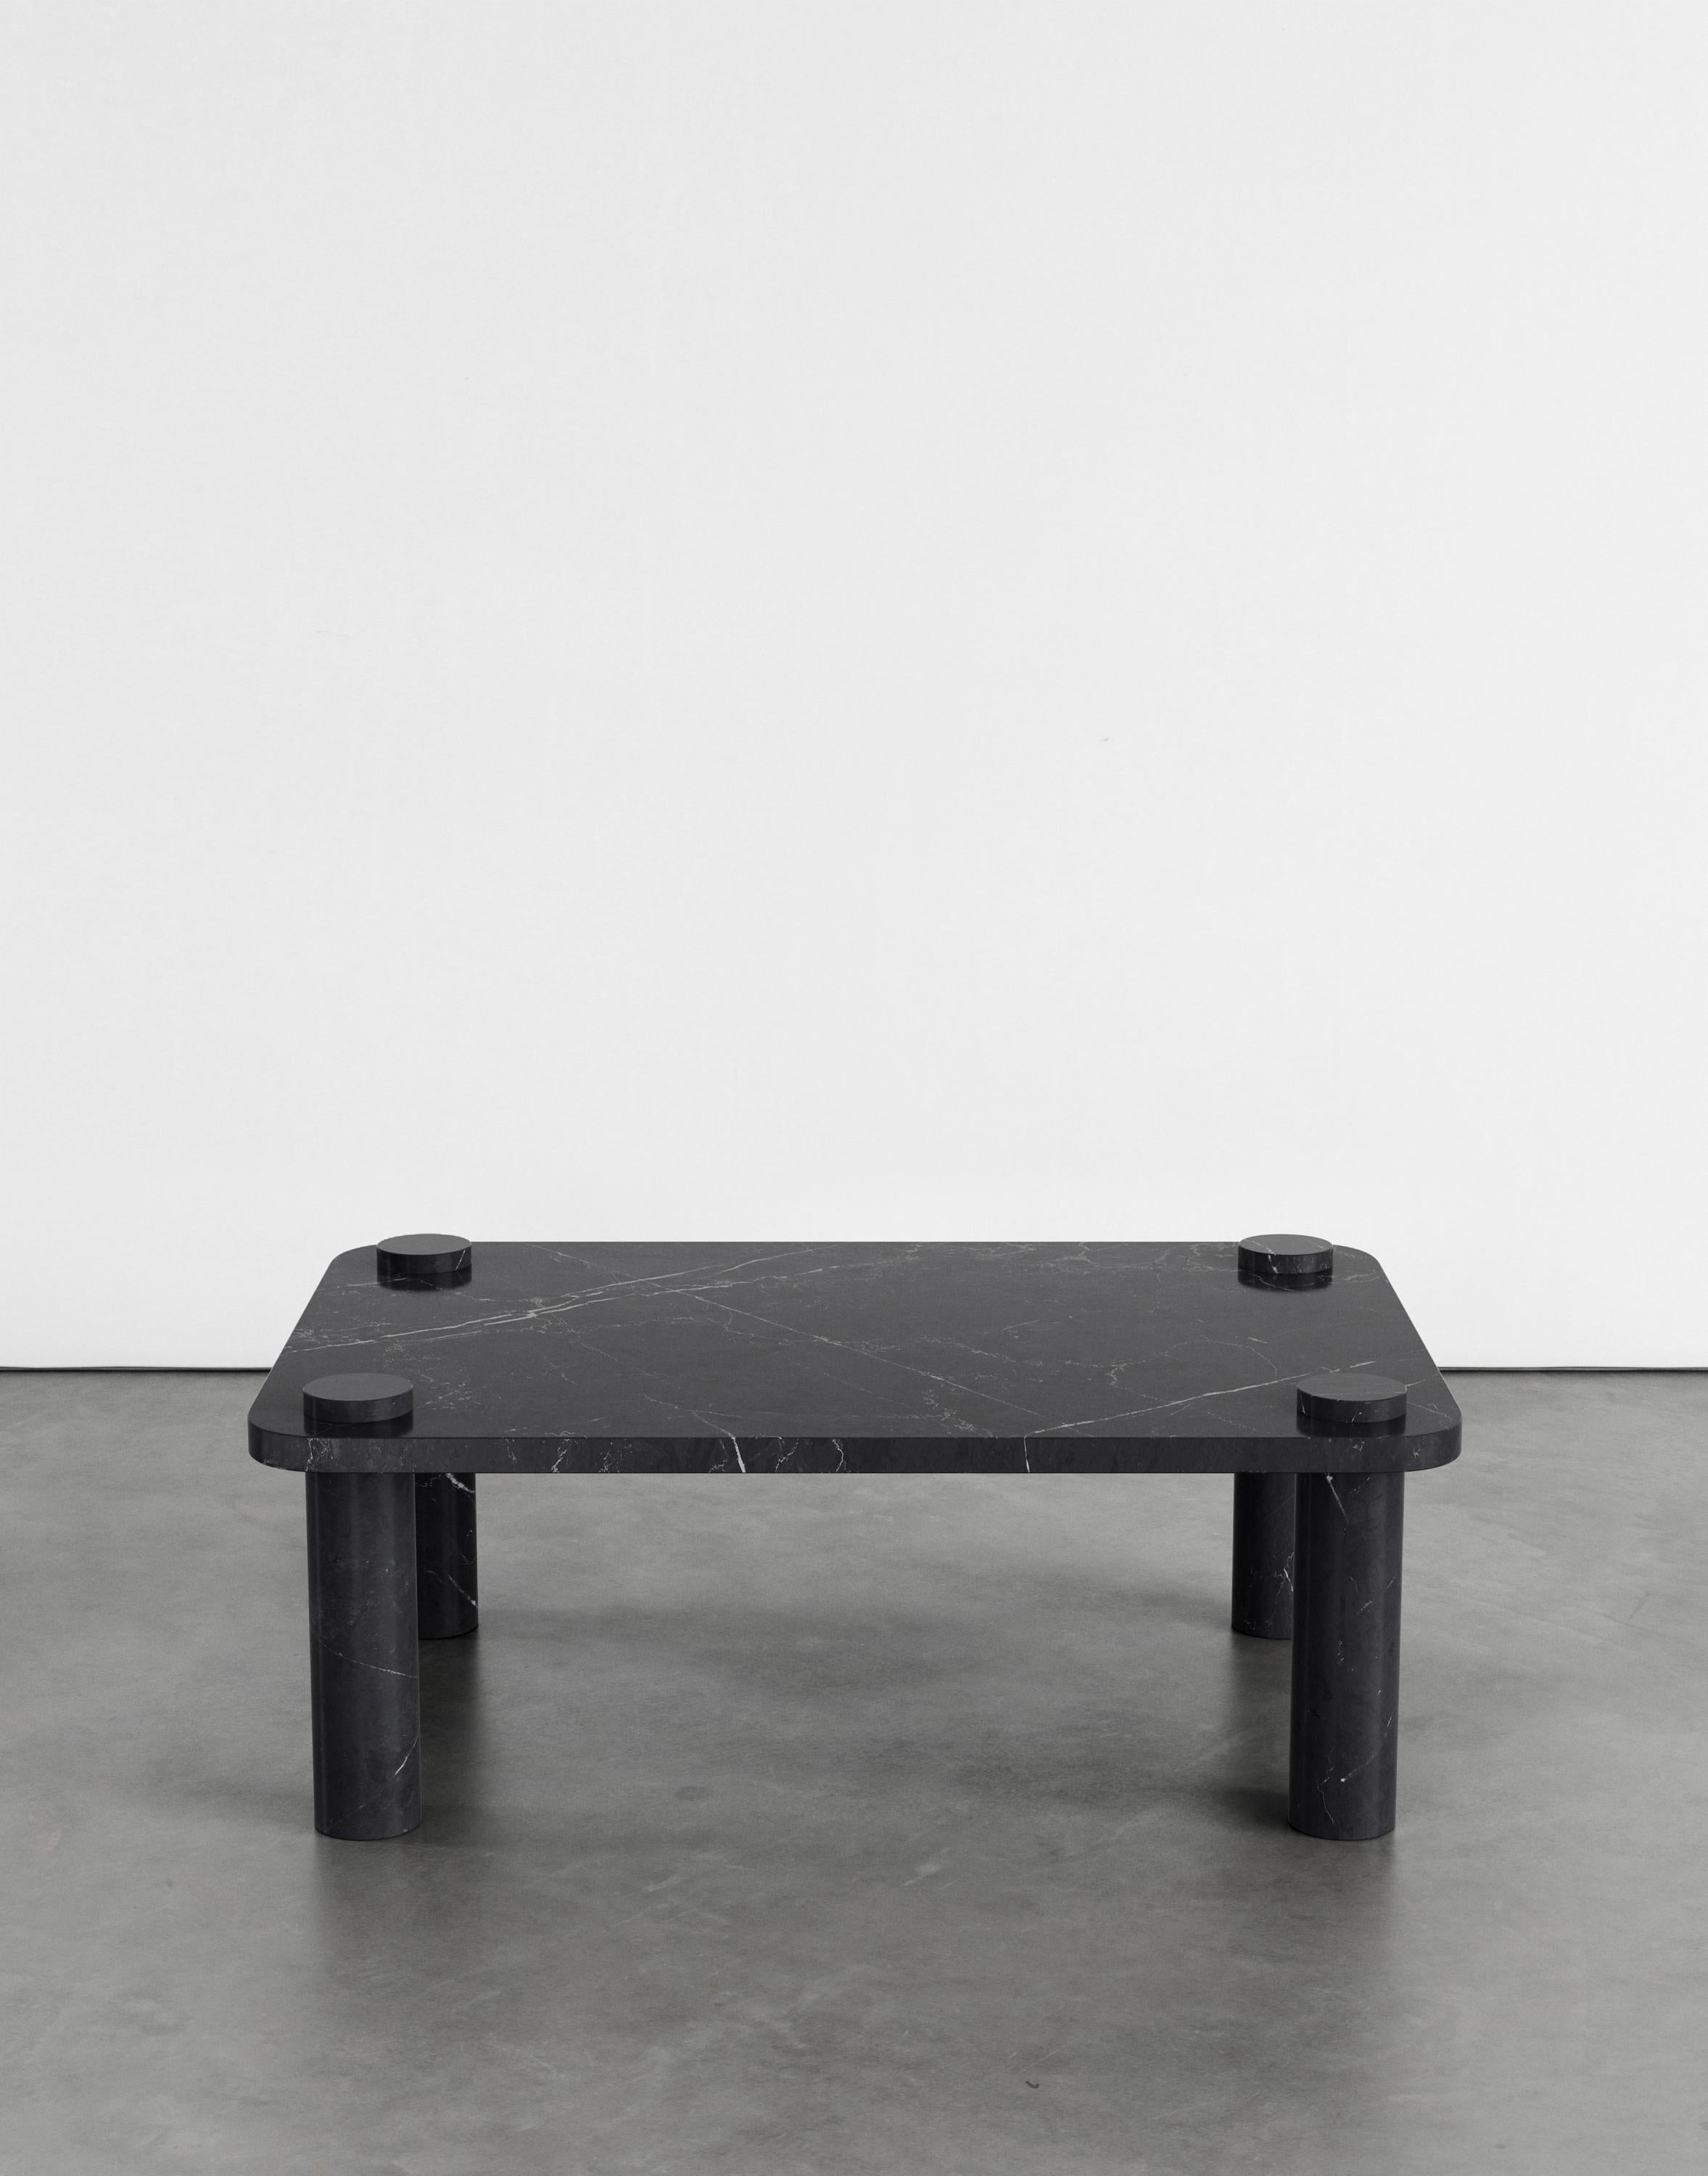 Simone 107 coffee table by Agglomerati 
Dimensions: D 70 x W 100 x H 36 cm 
Materials: Black Marquina. Available in other stones. 

Agglomerati is a London-based studio creating distinctive stone furniture. Established in 2019 by Australian